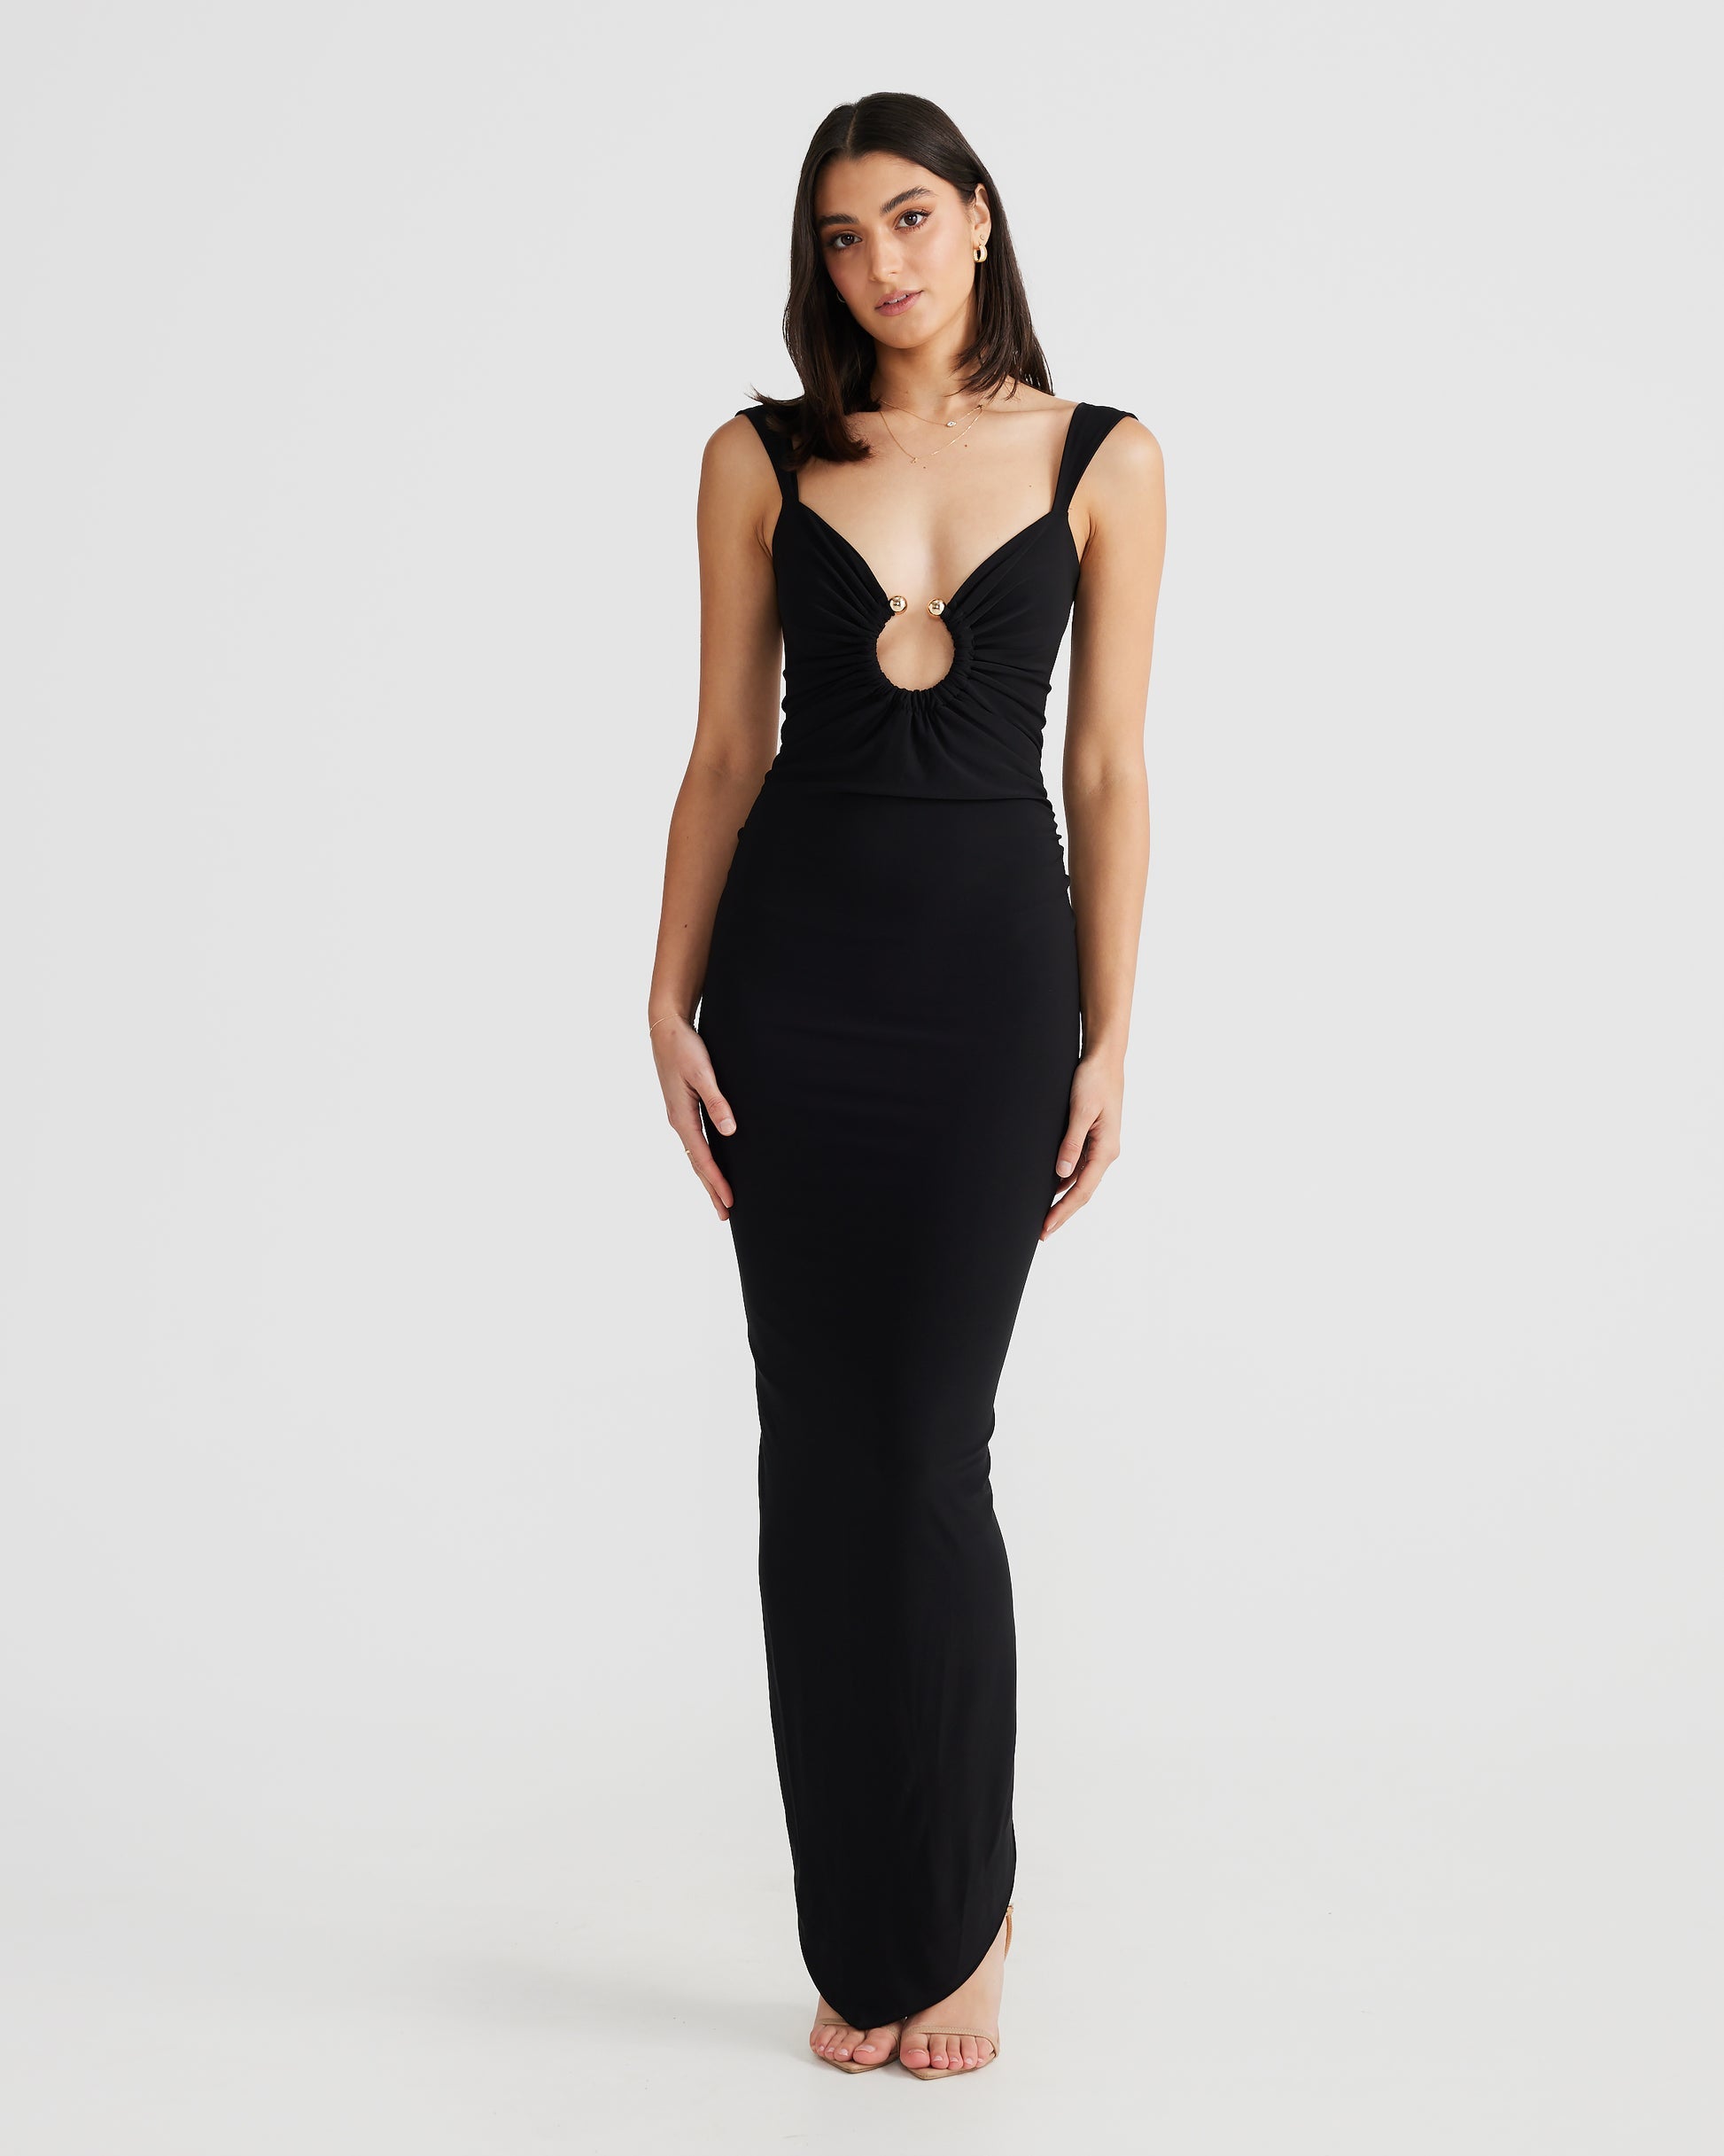 MÉLANI The Label ELENA Black Backless Fitted Dress